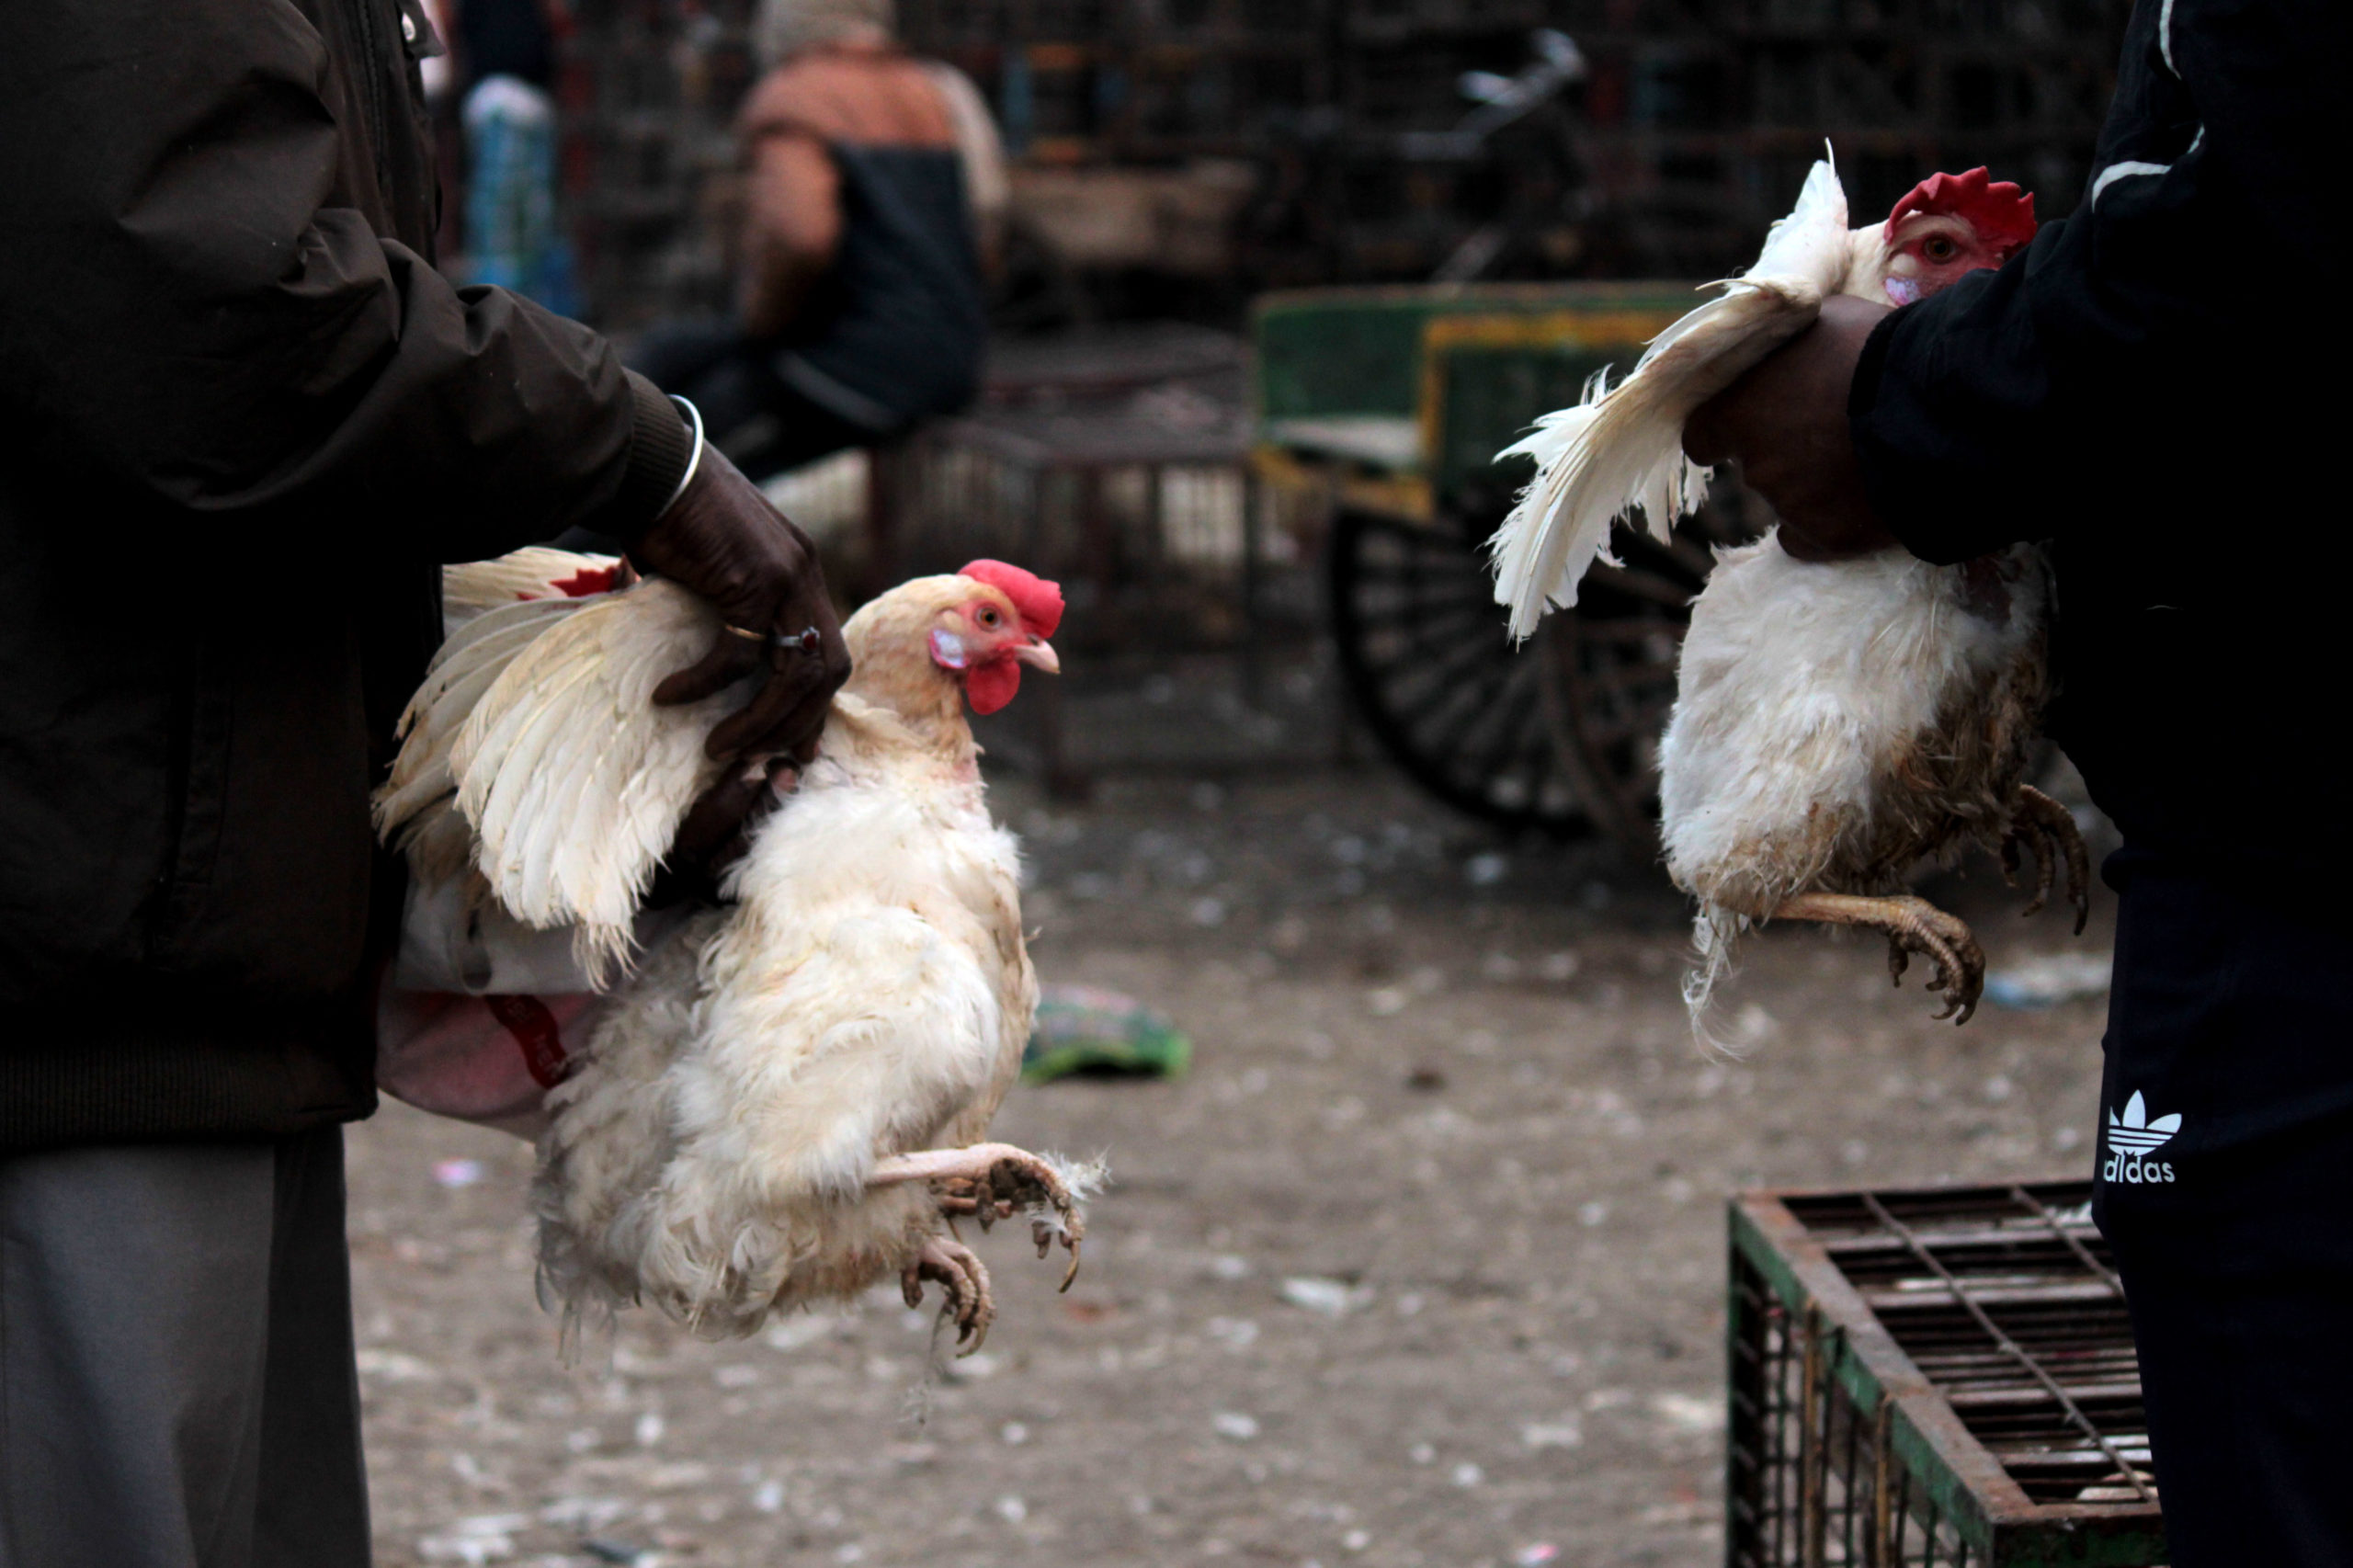 Bird flu: Delhi govt bans sale of processed, packaged chicken brought from outside city